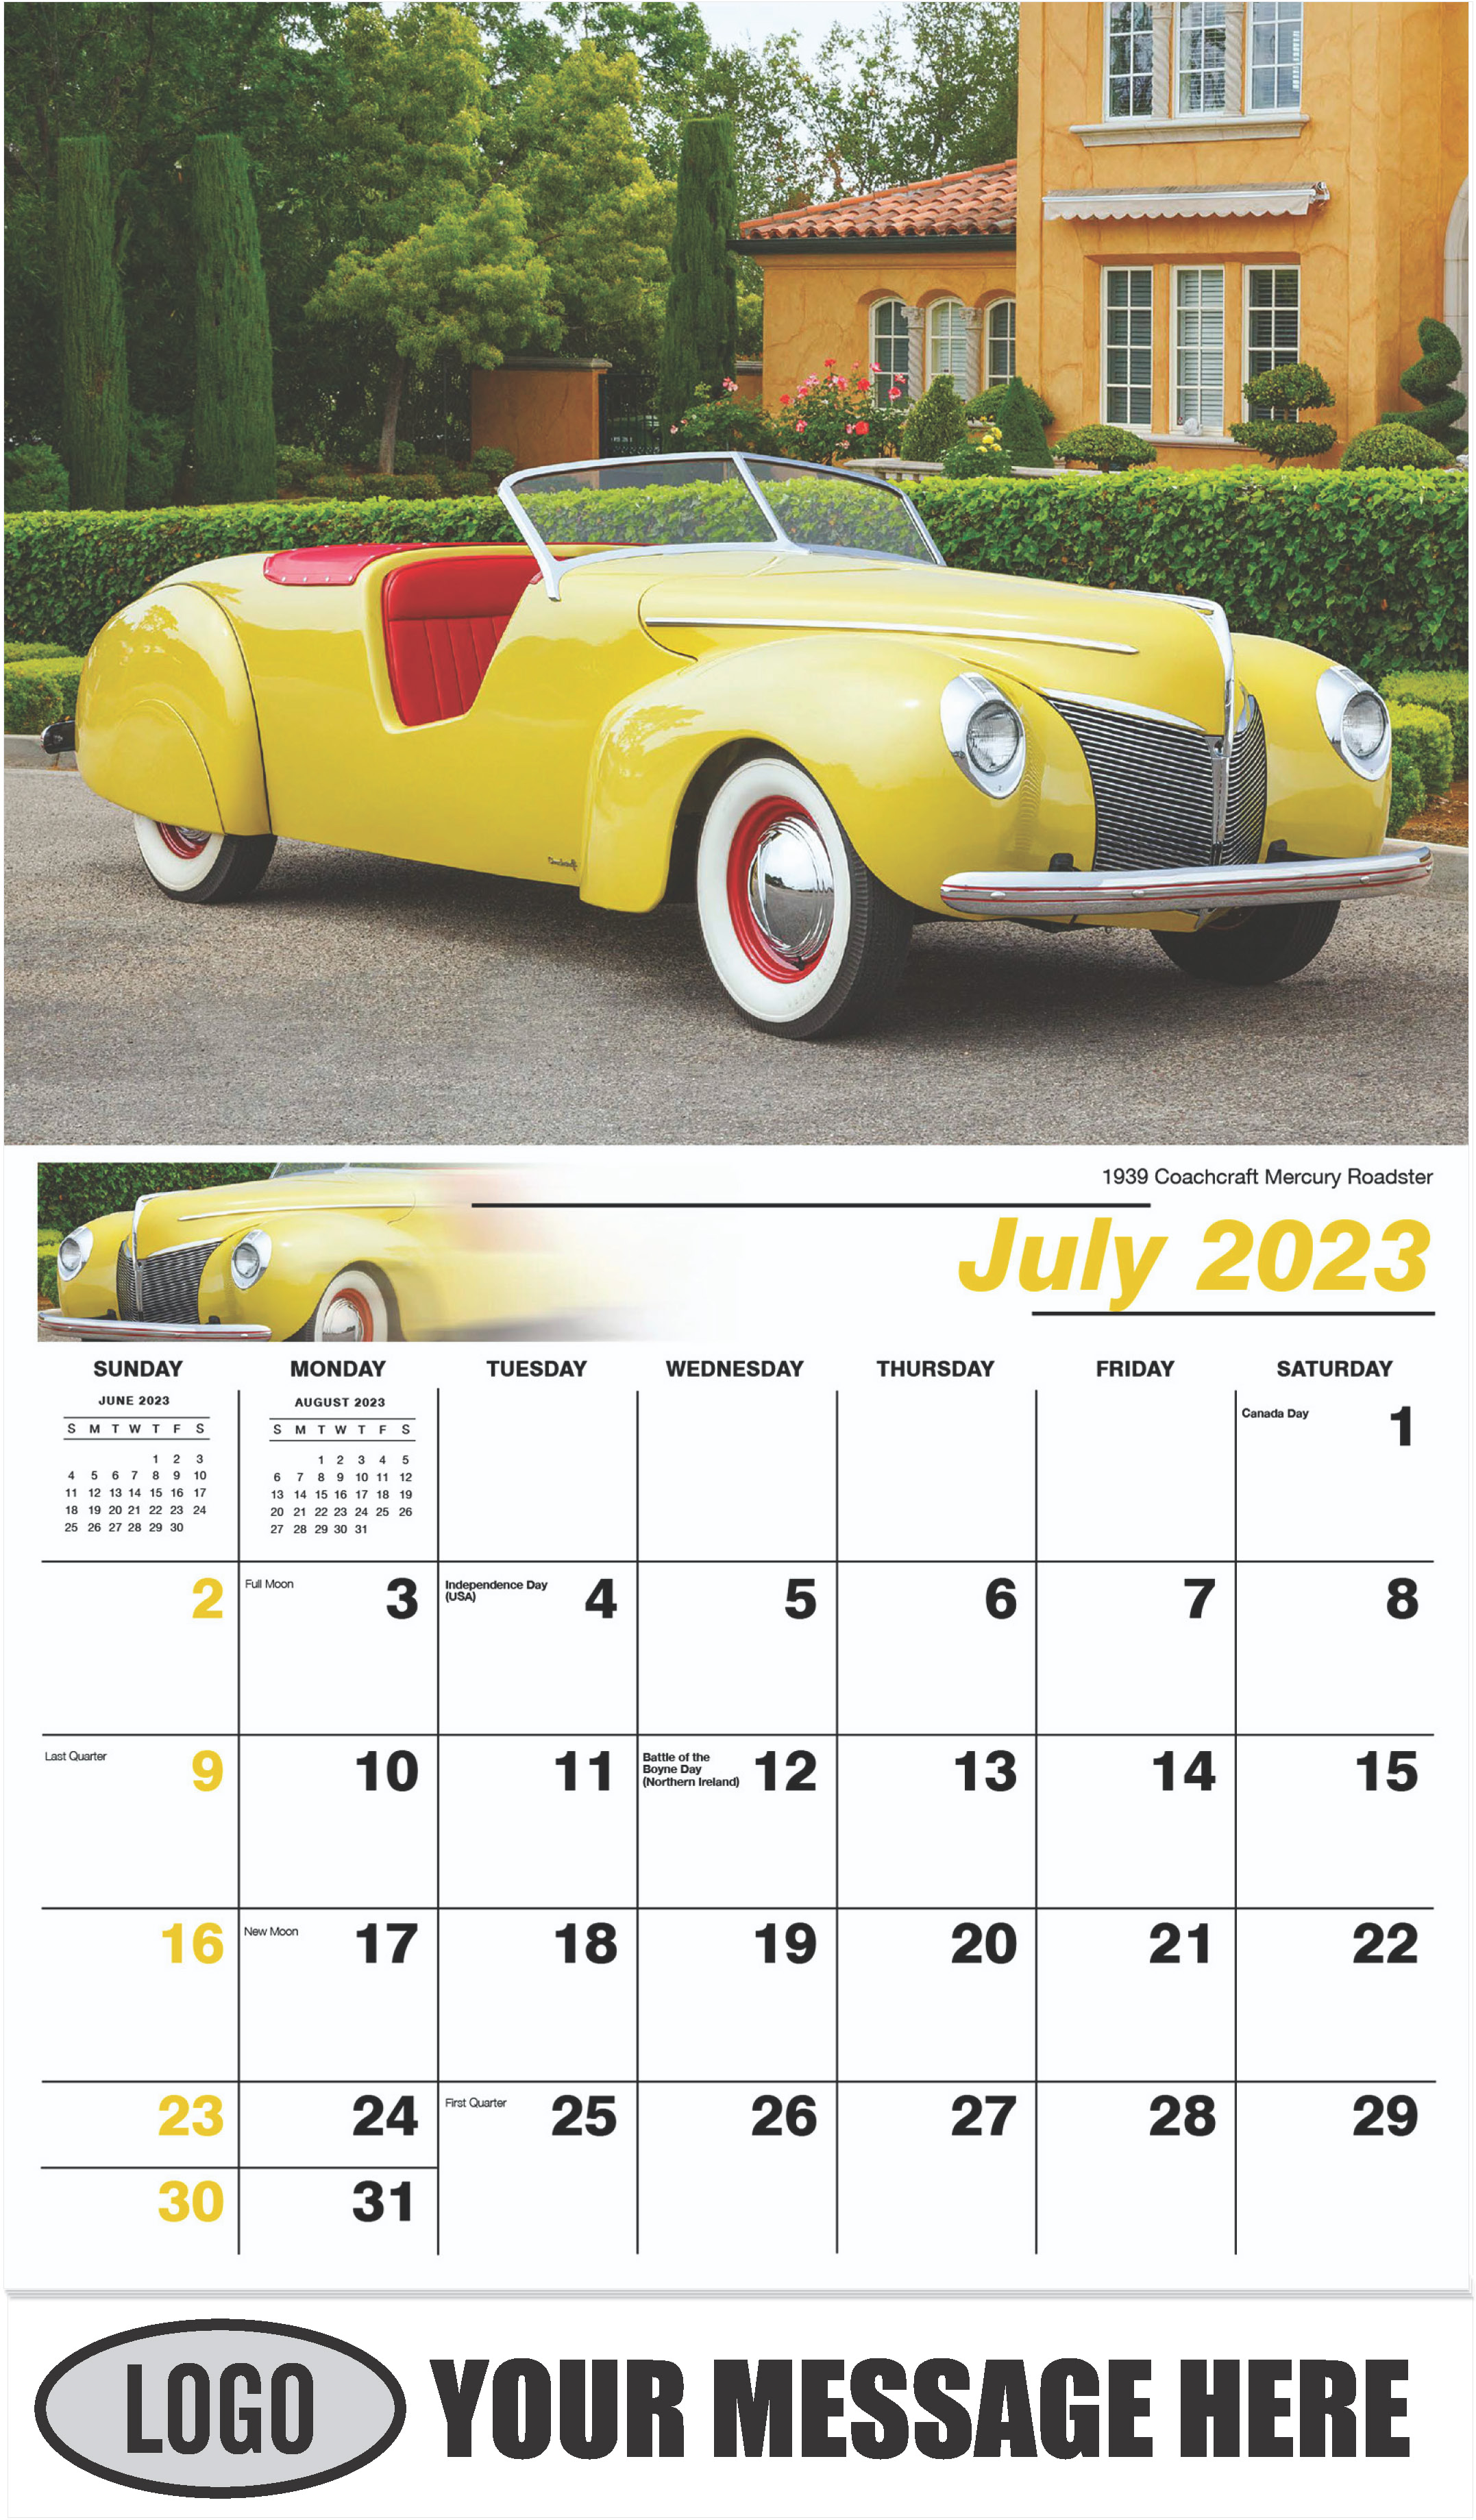 1939 Coachcraft Mercury Roadster - July - Henry's Heritage Ford Cars 2023 Promotional Calendar